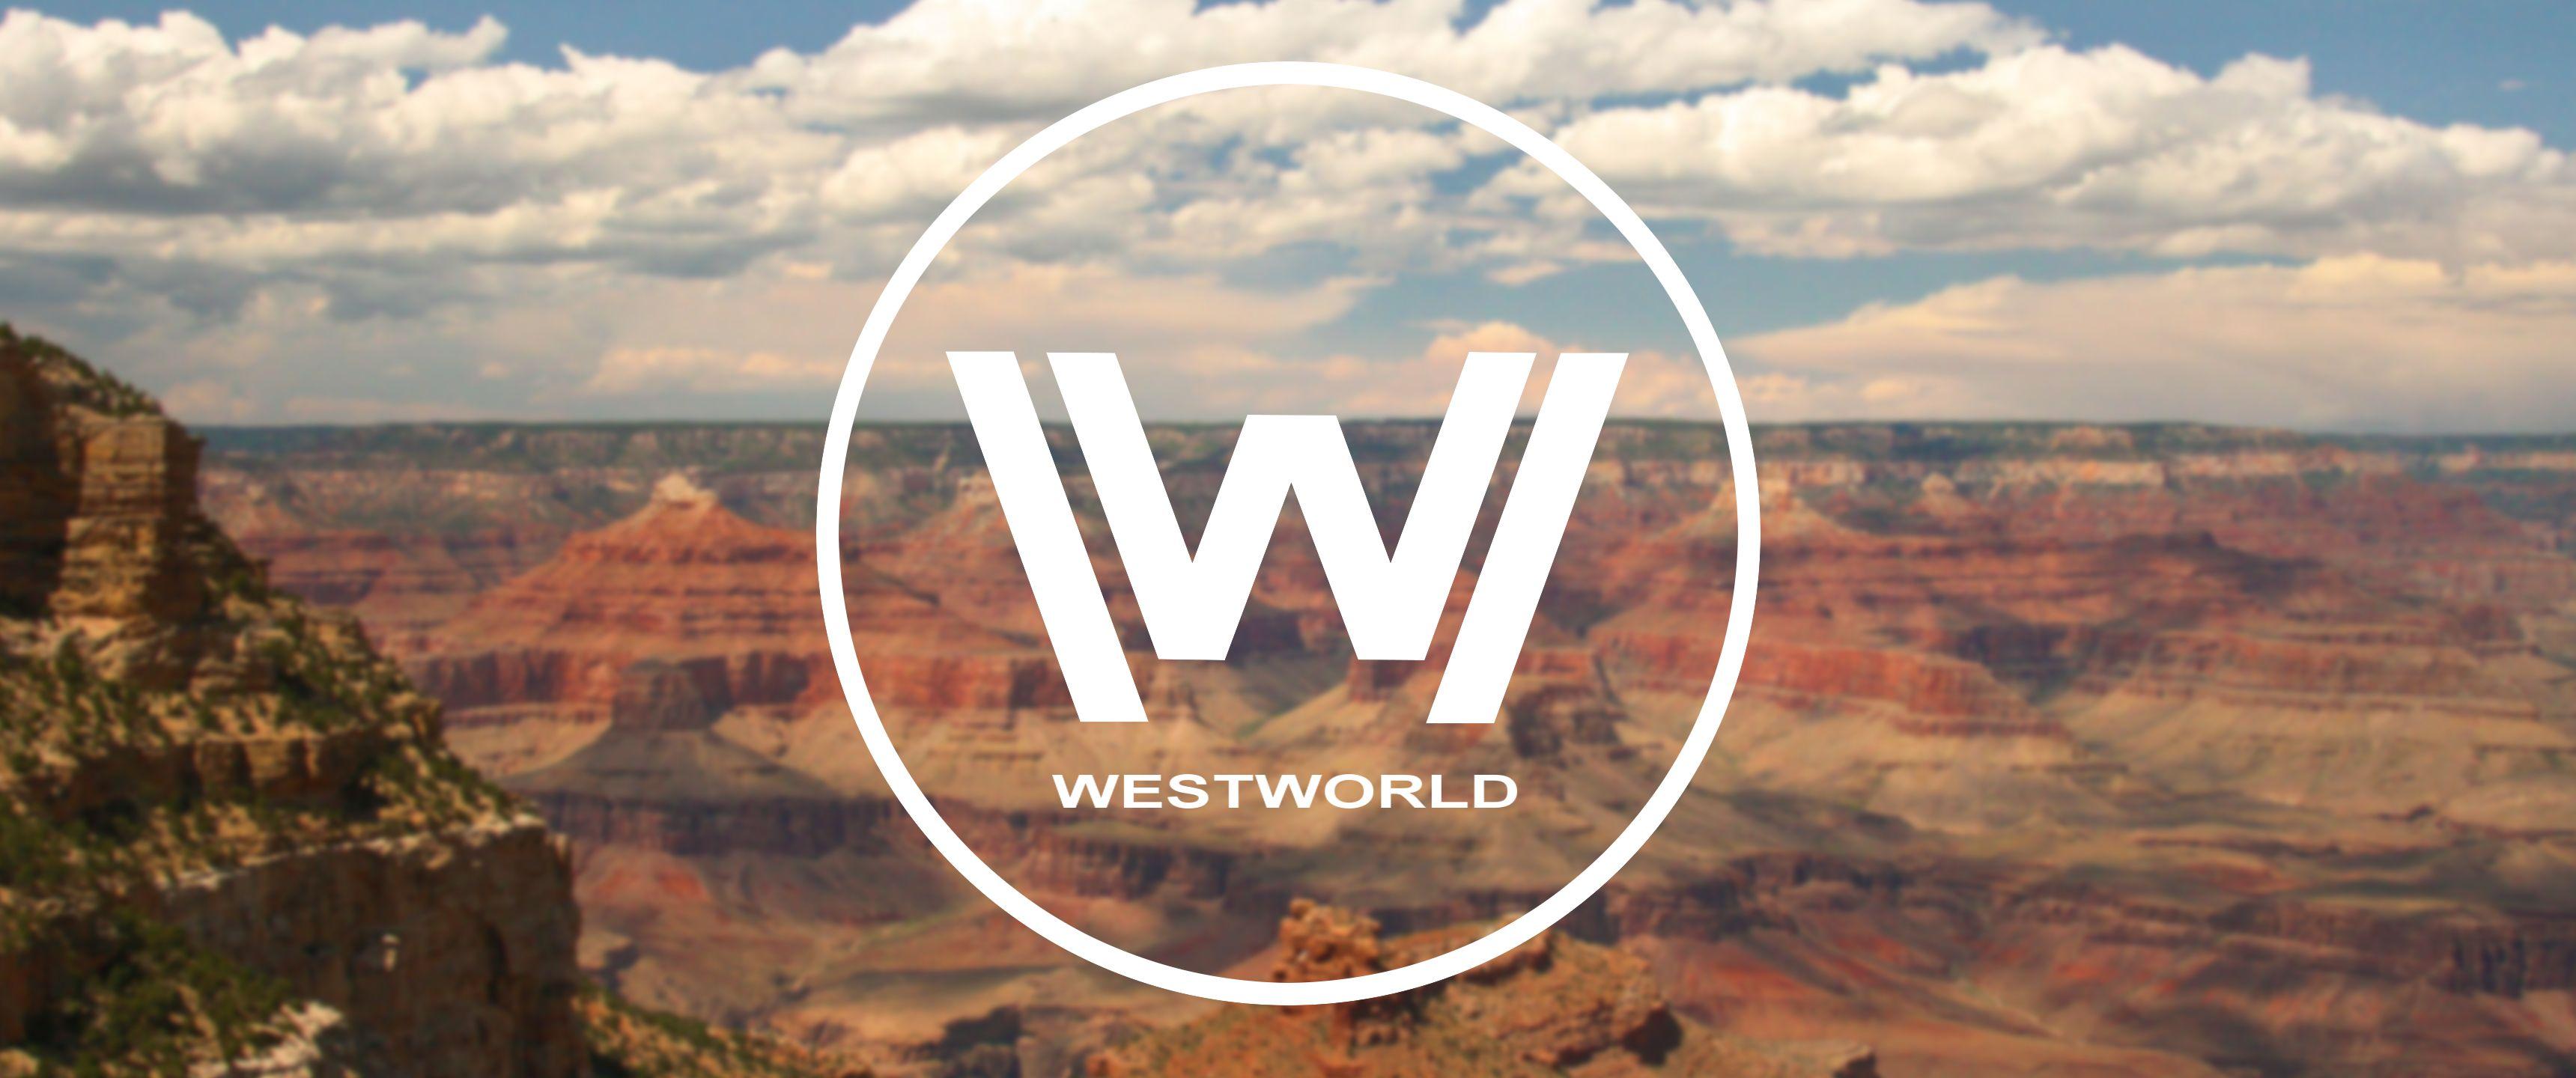 Haven't seen a Westworld wallpapers for ultrawides. Made a simple